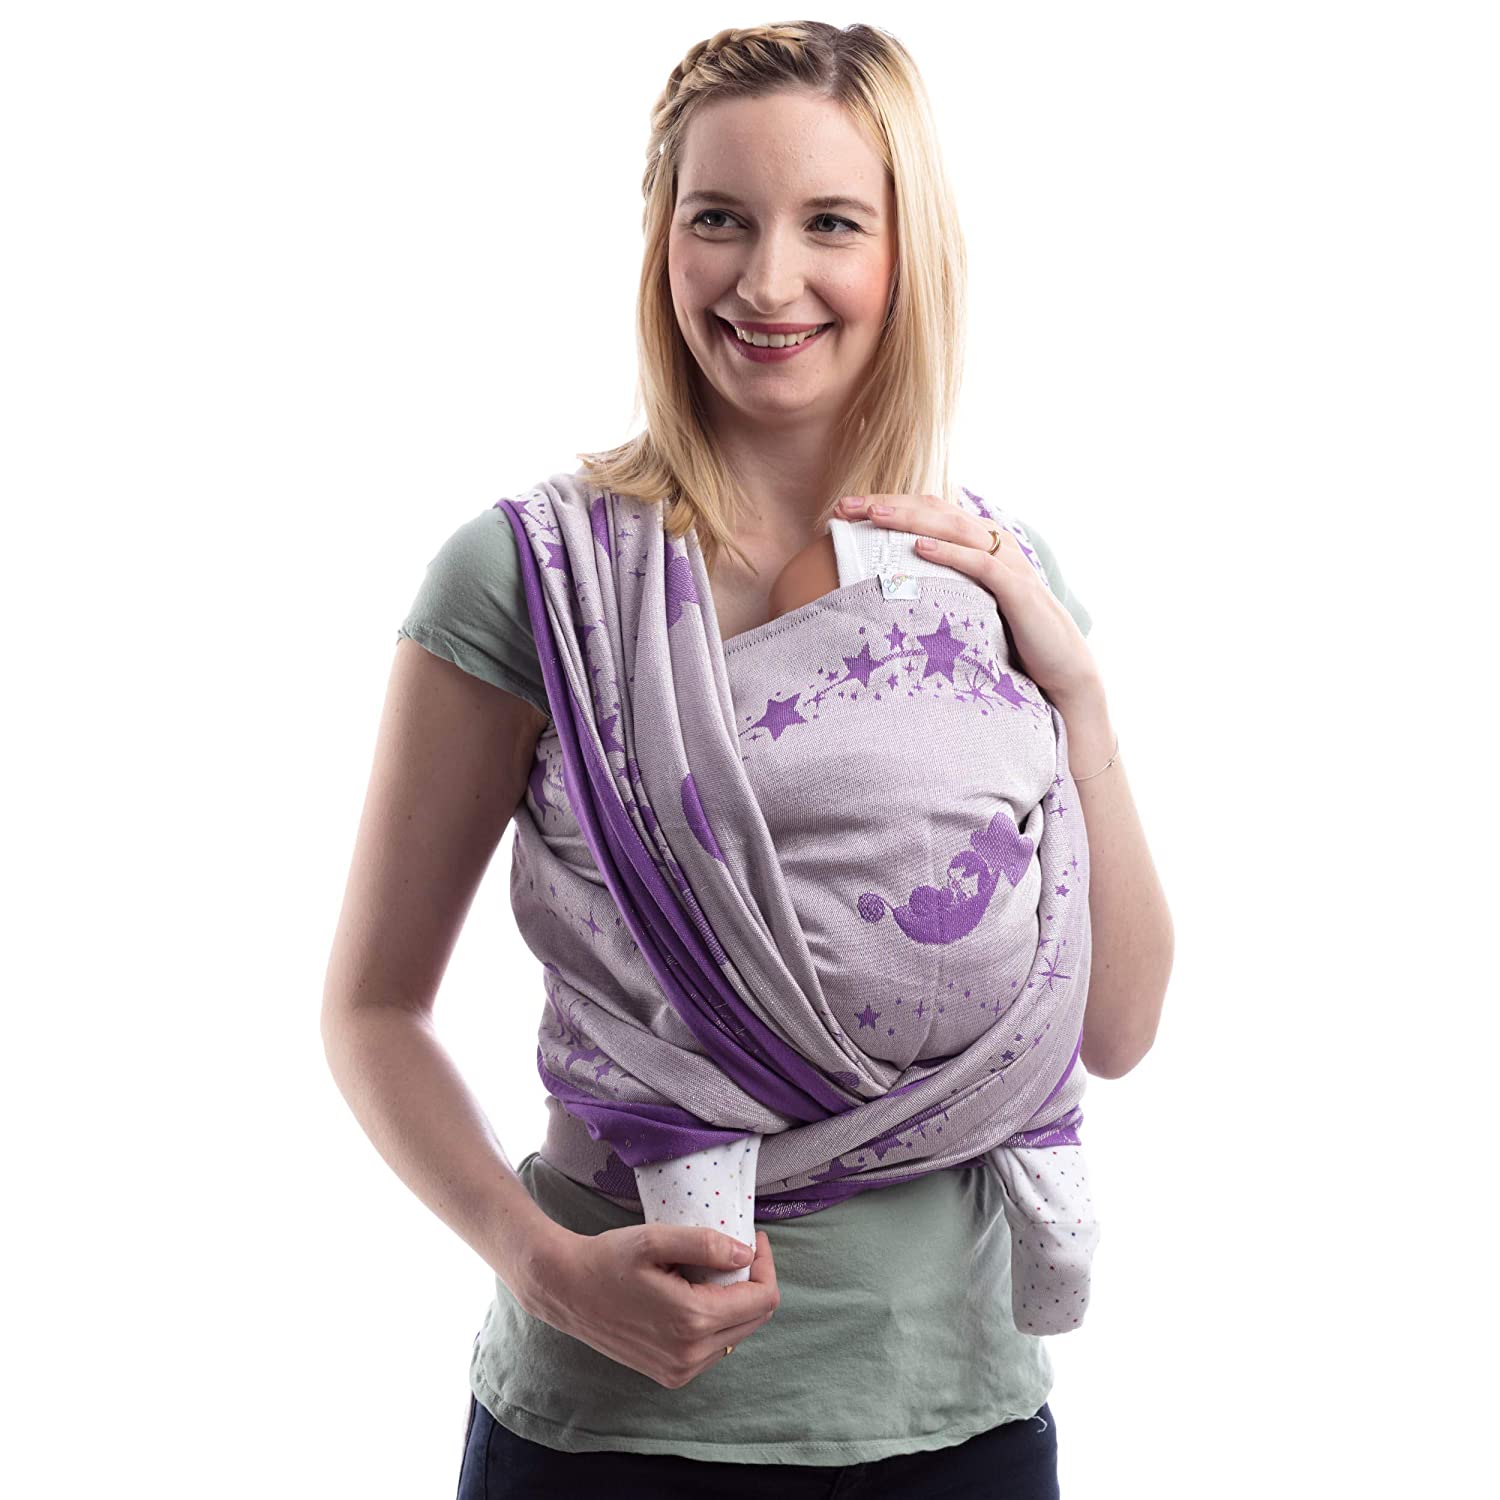 SCHMUSEWOLKE Baby Carrier Sling Jacquard Cuddle Cloud Violet Shine Organic Cotton 80 x 485 cm Baby Size Toddler 9-60 Months 6-16 kg Belly and Back Carrier Towel